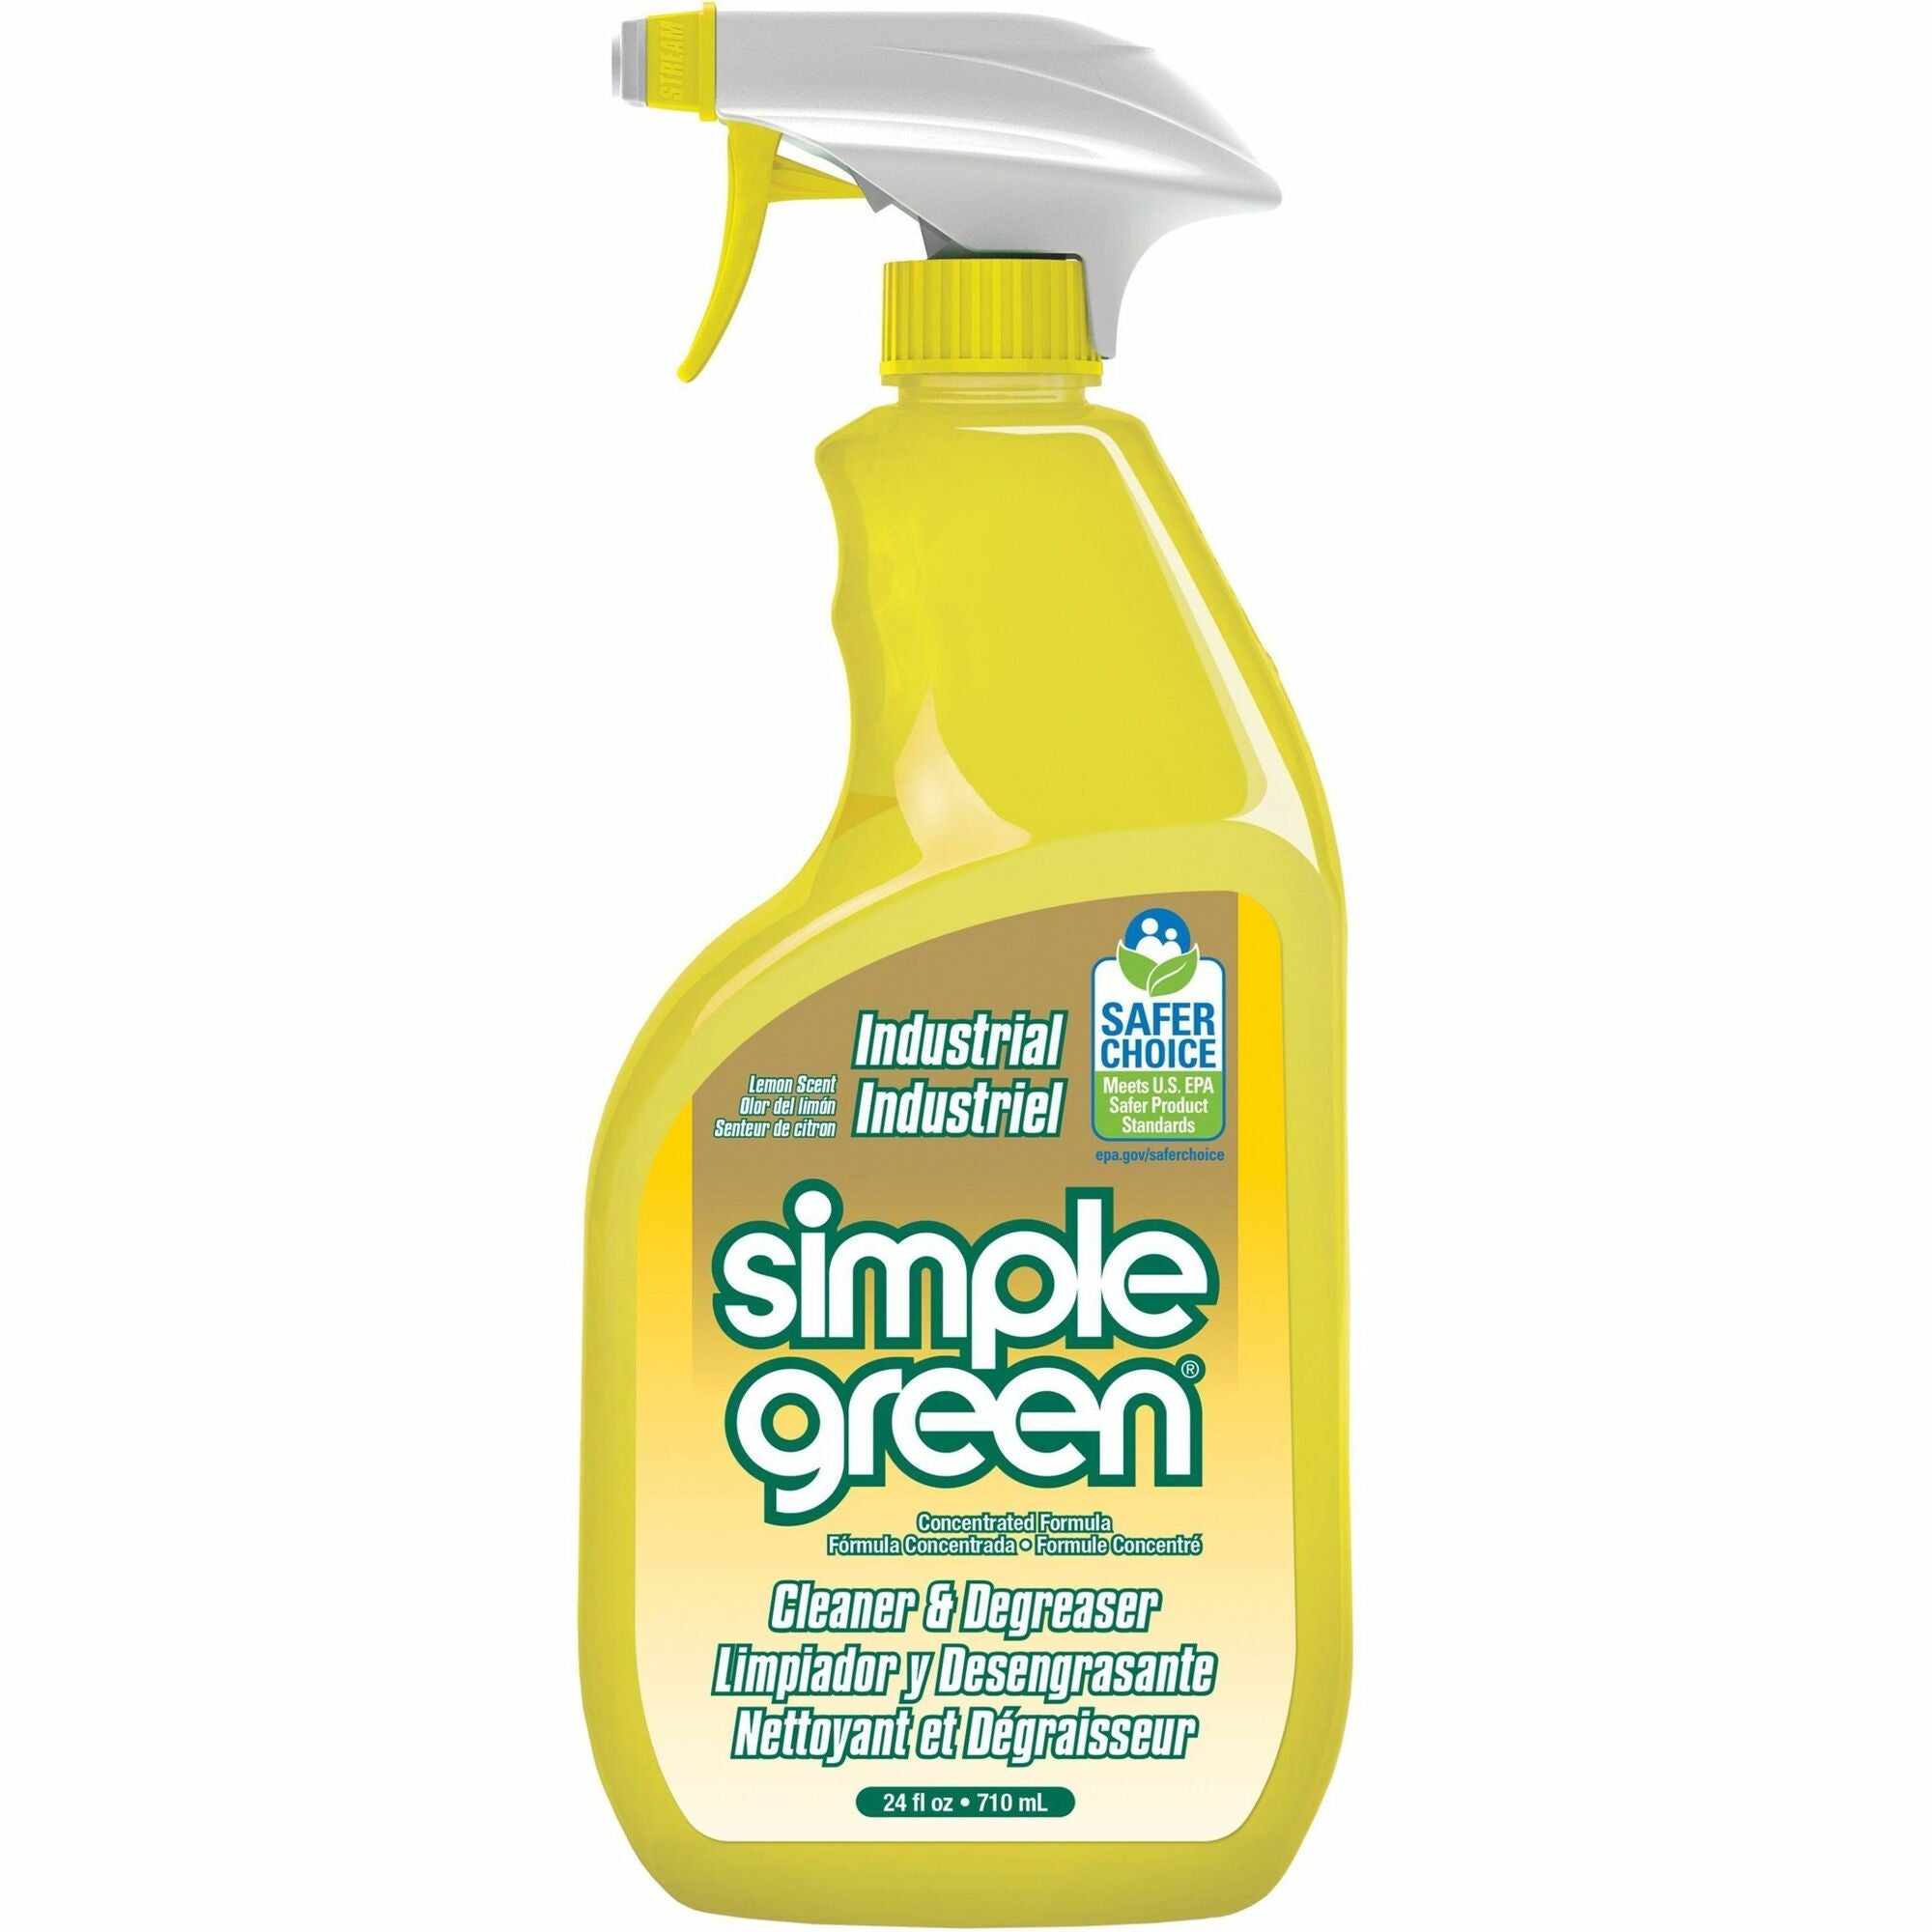 simple-green-industrial-cleaner-degreaser-concentrate-24-fl-oz-08-quart-lemon-scent-12-carton-non-toxic-butyl-free-phosphate-free-non-abrasive-non-corrosive-deodorize-lemon_smp14002ct - 1